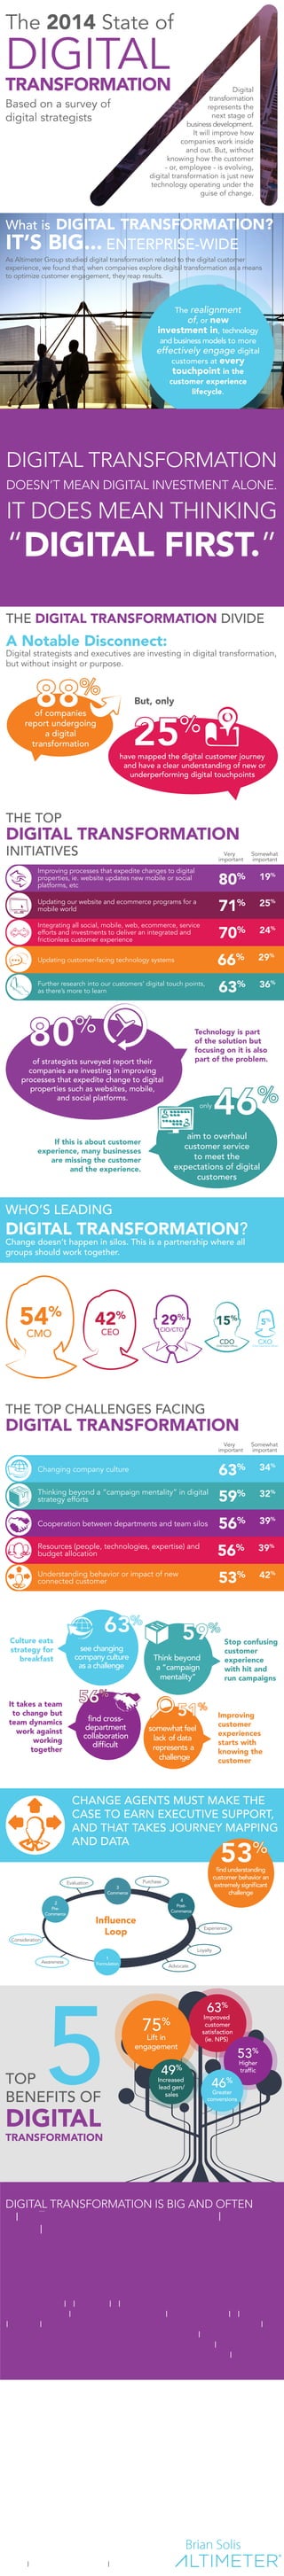 Digital 
transformation 
represents the 
next stage of 
business development. 
It will improve how 
companies work inside 
and out. But, without 
knowing how the customer 
- or, employee - is evolving, 
digital transformation is just new 
technology operating under the 
guise of change. 
What is DIGITAL TRANSFORMATION? 
IT’S BIG... ENTERPRISE-WIDE 
As Altimeter Group studied digital transformation related to the digital customer 
experience, we found that, when companies explore digital transformation as a means 
to optimize customer engagement, they reap results. 
The realignment 
of, or new 
The 2014 State of 
DIGITAL 
TRANSFORMATION 
Based on a survey of 
digital strategists 
investment in, technology 
and business models to more 
effectively engage digital 
customers at every 
touchpoint in the 
customer experience 
lifecycle. 
DIGITAL TRANSFORMATION 
DOESN’T MEAN DIGITAL INVESTMENT ALONE. 
IT DOES MEAN THINKING 
“DIGITAL FIRST.” 
THE DIGITAL TRANSFORMATION DIVIDE 
A Notable Disconnect: 
Digital strategists and executives are investing in digital transformation, 
but without insight or purpose. 
88% 
But, only 
25% 
have mapped the digital customer journey 
and have a clear understanding of new or 
underperforming digital touchpoints 
of companies 
report undergoing 
a digital 
transformation 
THE TOP 
DIGITAL TRANSFORMATION 
INITIATIVES Very 
important 
Somewhat 
important 
Improving processes that expedite changes to digital 
properties, ie. website updates new mobile or social 
platforms, etc 80% 19% 
Updating our website and ecommerce programs for a 
mobile world 71% 25% 
Integrating all social, mobile, web, ecommerce, service 
efforts and investments to deliver an integrated and 
frictionless customer experience 70% 24% 
Updating customer-facing technology systems 66% 29% 
Further research into our customers’ digital touch points, 
as there’s more to learn 63% 36% 
Technology is part 
of the solution but 
focusing on it is also 
part of the problem. 
46% 
only 
aim to overhaul 
customer service 
to meet the 
expectations of digital 
customers 
80% 
of strategists surveyed report their 
companies are investing in improving 
processes that expedite change to digital 
properties such as websites, mobile, 
and social platforms. 
If this is about customer 
experience, many businesses 
are missing the customer 
and the experience. 
WHO’S LEADING 
DIGITAL TRANSFORMATION? 
Change doesn’t happen in silos. This is a partnership where all 
groups should work together. 
54% 
CMO 
42% 
CEO 
29% 15% 5% 
CIO/CTO 
CDO 
(Chief Digital Officer) 
CXO 
(Chief Experience Officer) 
THE TOP CHALLENGES FACING 
DIGITAL TRANSFORMATION 
Very 
important 
Somewhat 
important 
Changing company culture 63% 34% 
Thinking beyond a “campaign mentality” in digital 
strategy efforts 59% 32% 
Cooperation between departments and team silos 56% 39% 
Resources (people, technologies, expertise) and 
budget allocation 56% 39% 
Understanding behavior or impact of new 
connected customer 53% 42% 
Culture eats 
strategy for 
breakfast 
63% 
see changing 
company culture 
as a challenge 
56% 
find cross-department 
collaboration 
difficult 
It takes a team 
to change but 
team dynamics 
work against 
working 
together 
Stop confusing 
customer 
experience 
with hit and 
run campaigns 
59% 
Think beyond 
a “campaign 
mentality” 
51% 
somewhat feel 
lack of data 
represents a 
challenge 
Improving 
customer 
experiences 
starts with 
knowing the 
customer 
CHANGE AGENTS MUST MAKE THE 
CASE TO EARN EXECUTIVE SUPPORT, 
AND THAT TAKES JOURNEY MAPPING 
AND DATA 
53% 
find understanding 
customer behavior an 
extremely significant 
challenge 
Commerce 
1 
3 
Formulation 
2 
Pre- 
Commerce 
TOP 5 
BENEFITS OF 
DIGITAL 
TRANSFORMATION 
63% 
Improved 
customer 
satisfaction 
(ie. NPS) 
53% 
Higher 
traffic 
46% 
Greater 
conversions 
75% 
Lift in 
engagement 
49% 
Increased 
lead gen/ 
sales 
DIGITAL TRANSFORMATION IS BIG AND OFTEN 
MISUNDERSTOOD. Understand how people use 
technology first to inform your strategy and give your 
work a sense of purpose. 
THE KEY TO DIGITAL 
TRANSFORMATION 
IS THAT IT’S NOT 
ALL ABOUT 
TECHNOLOGY 
DIGITAL 
TRANSFORMATION 
COMES DOWN TO 
PEOPLE 
NO MATTER 
HOW DIGITAL 
TRANSFORMATION 
IS PURSUED, 
BUSINESSES ARE 
CHANGING ALONG 
THE WAY 
CHANGE 
HAS TO START SOMEWHERE 
www.altimetergroup.com/digitaltransformation 
4 
Post- 
Commerce 
Evaluation Purchase 
Experience 
Loyalty 
Advocate 
Awareness 
Consideration 
Influence 
Loop 
